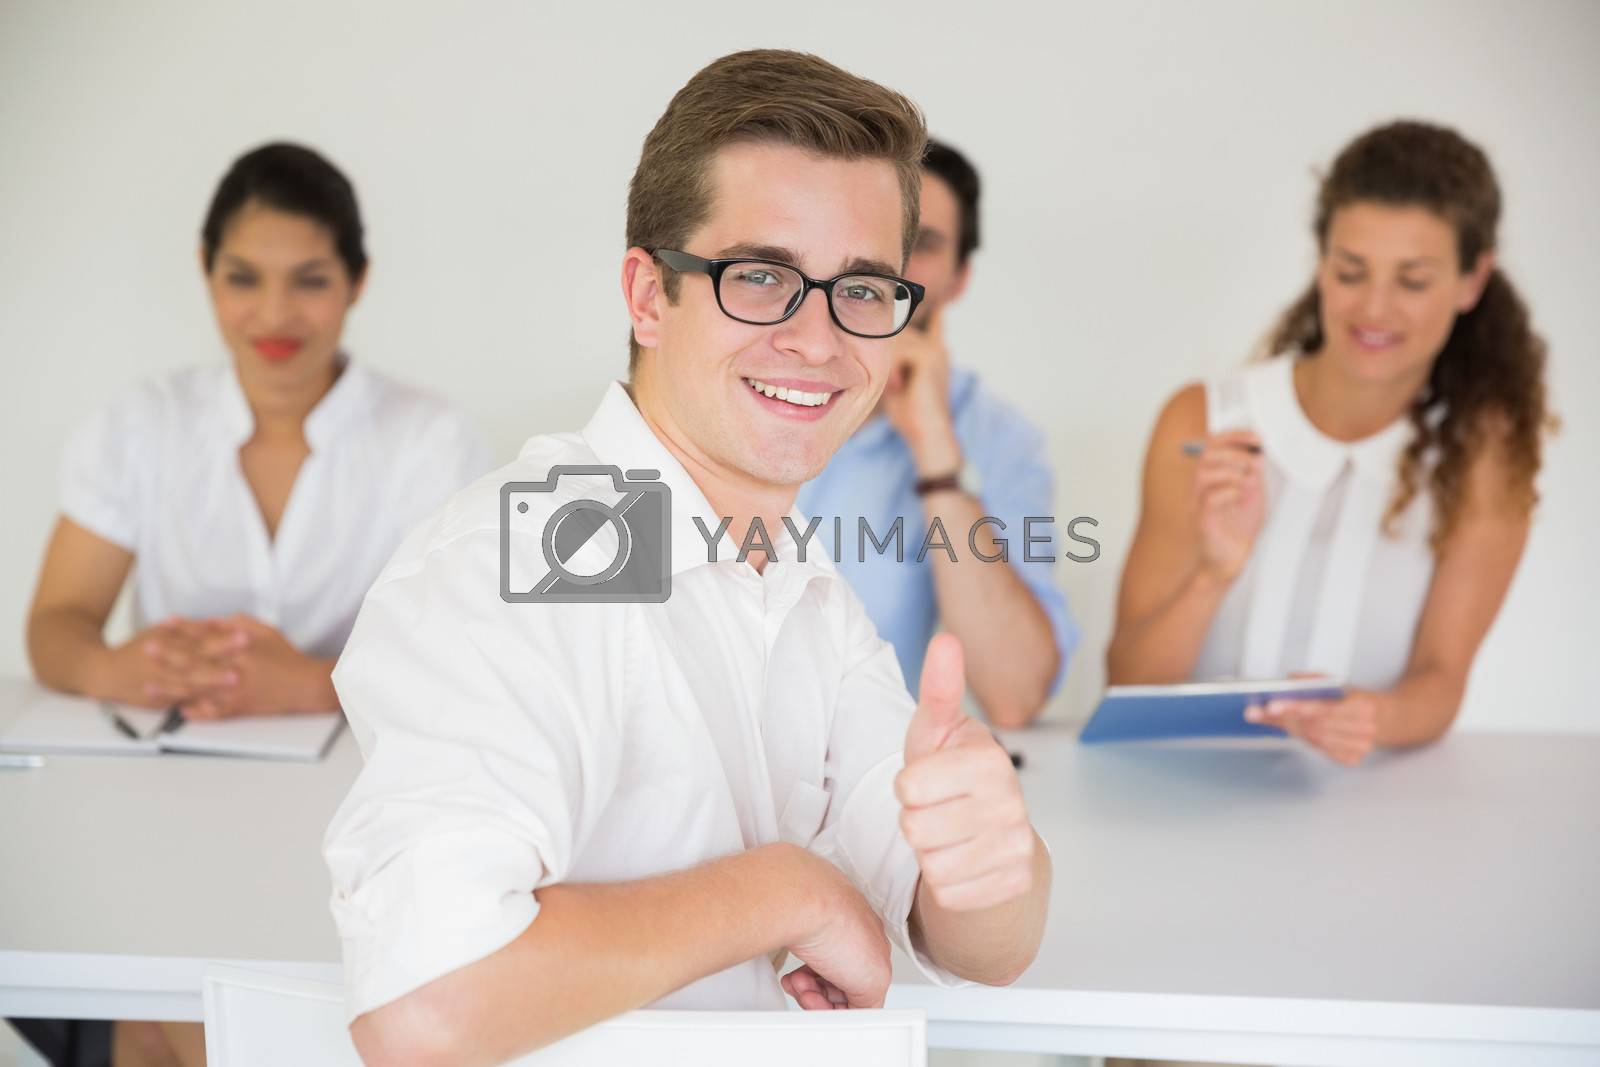 Royalty free image of Male candidate gesturing thumbs up by Wavebreakmedia